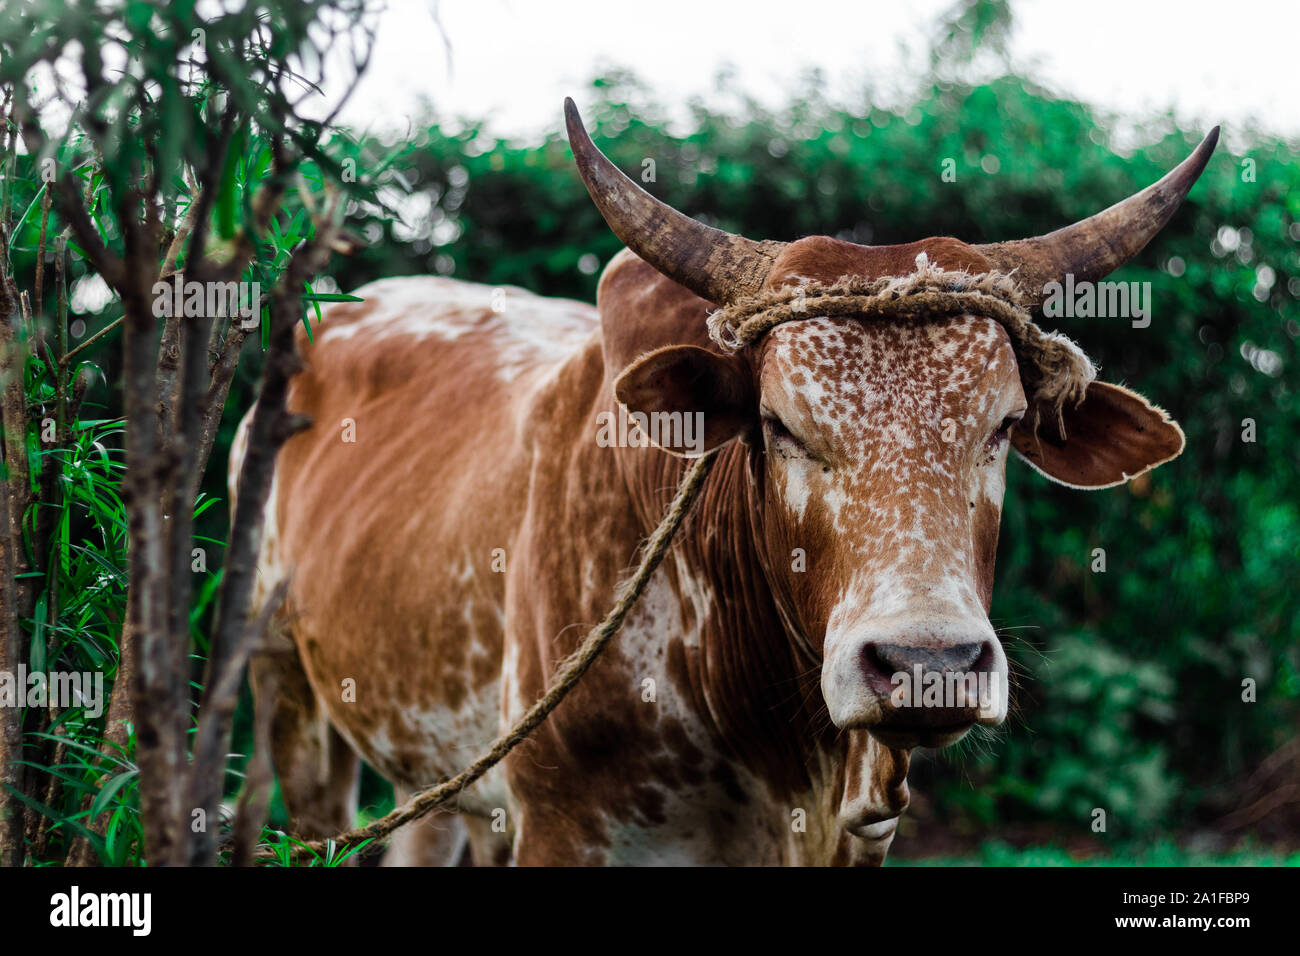 Brown spotted with horns cow looking through bushes Stock Photo